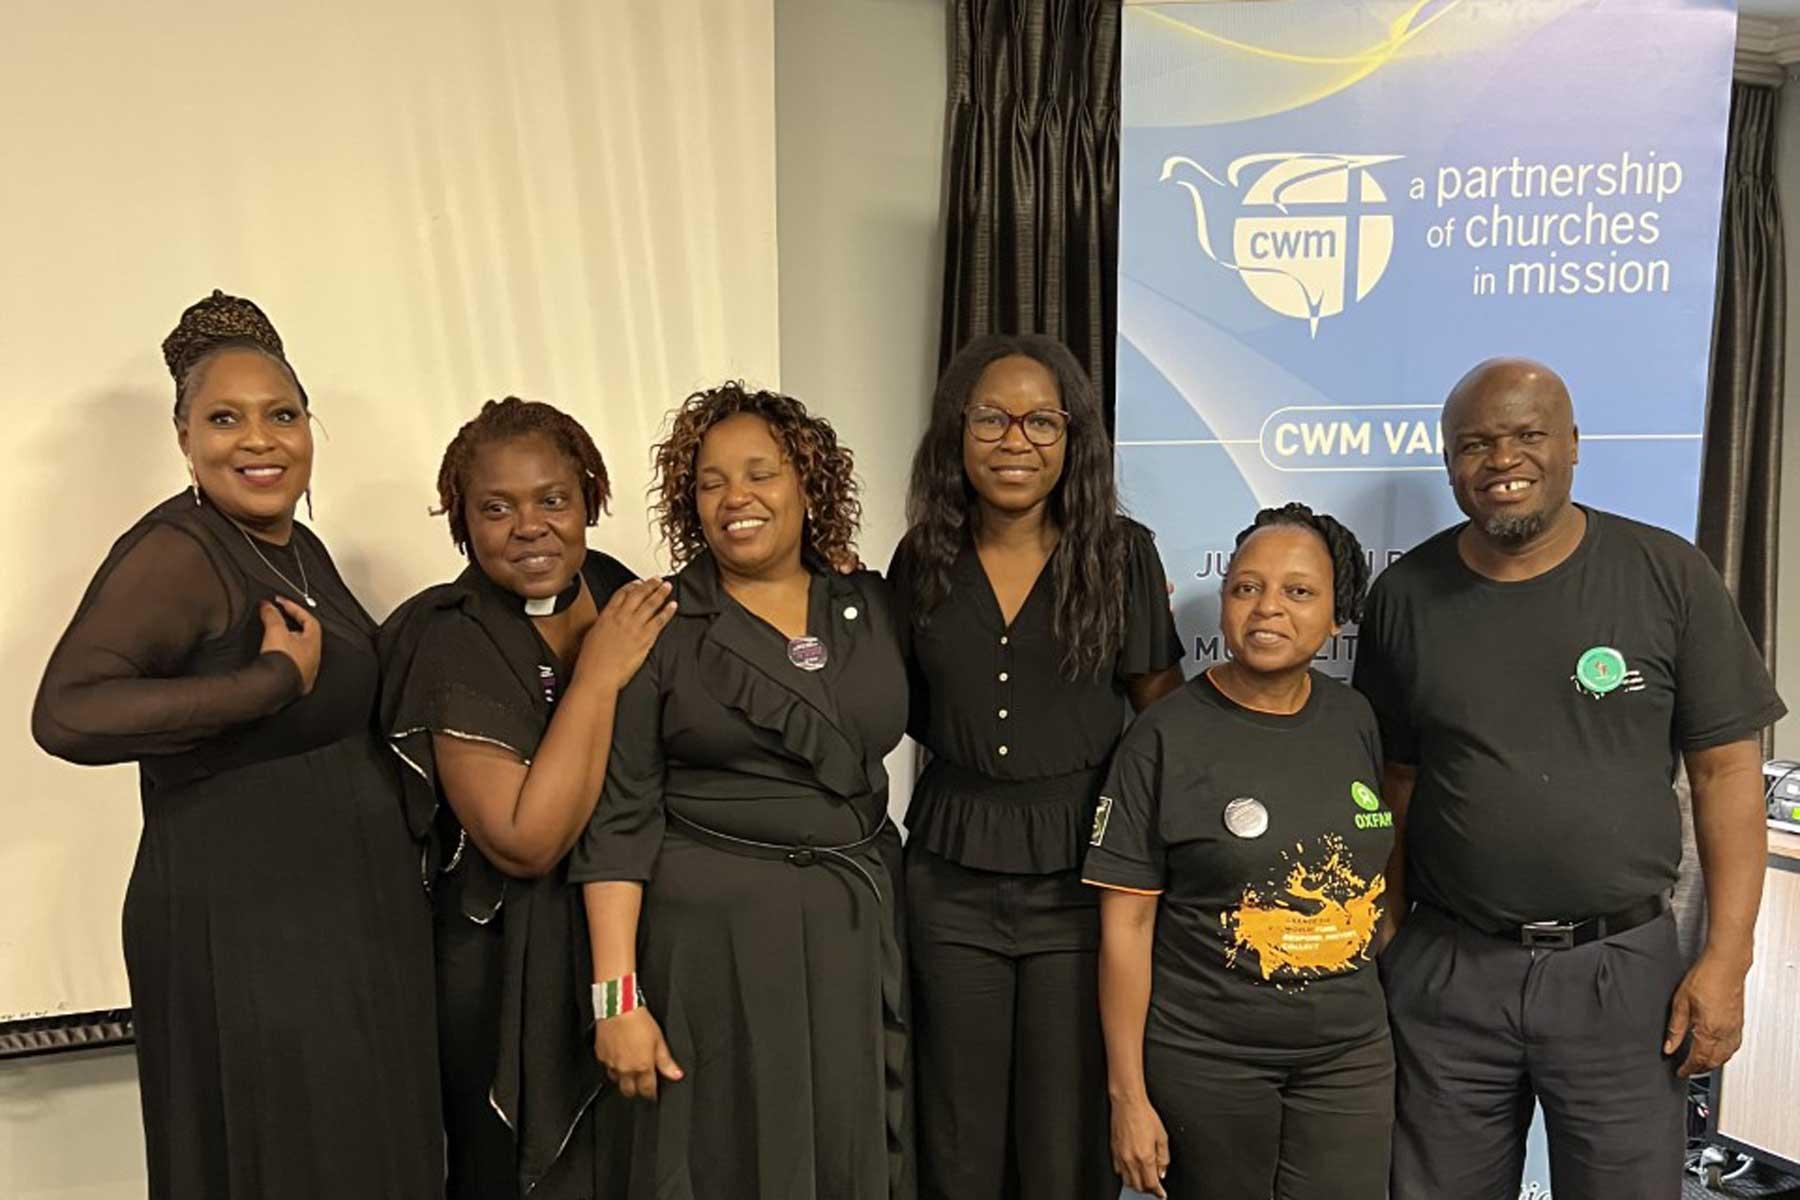 Organizers of the ecumenical dialogue which marked the start of the 16 Days campaign, including WCC’s Rev. Nicole Ashwood (second from left) and LWF’s Sikhonzile Ndlovu (third from right). Photo: CWM/Damon Mkandawire